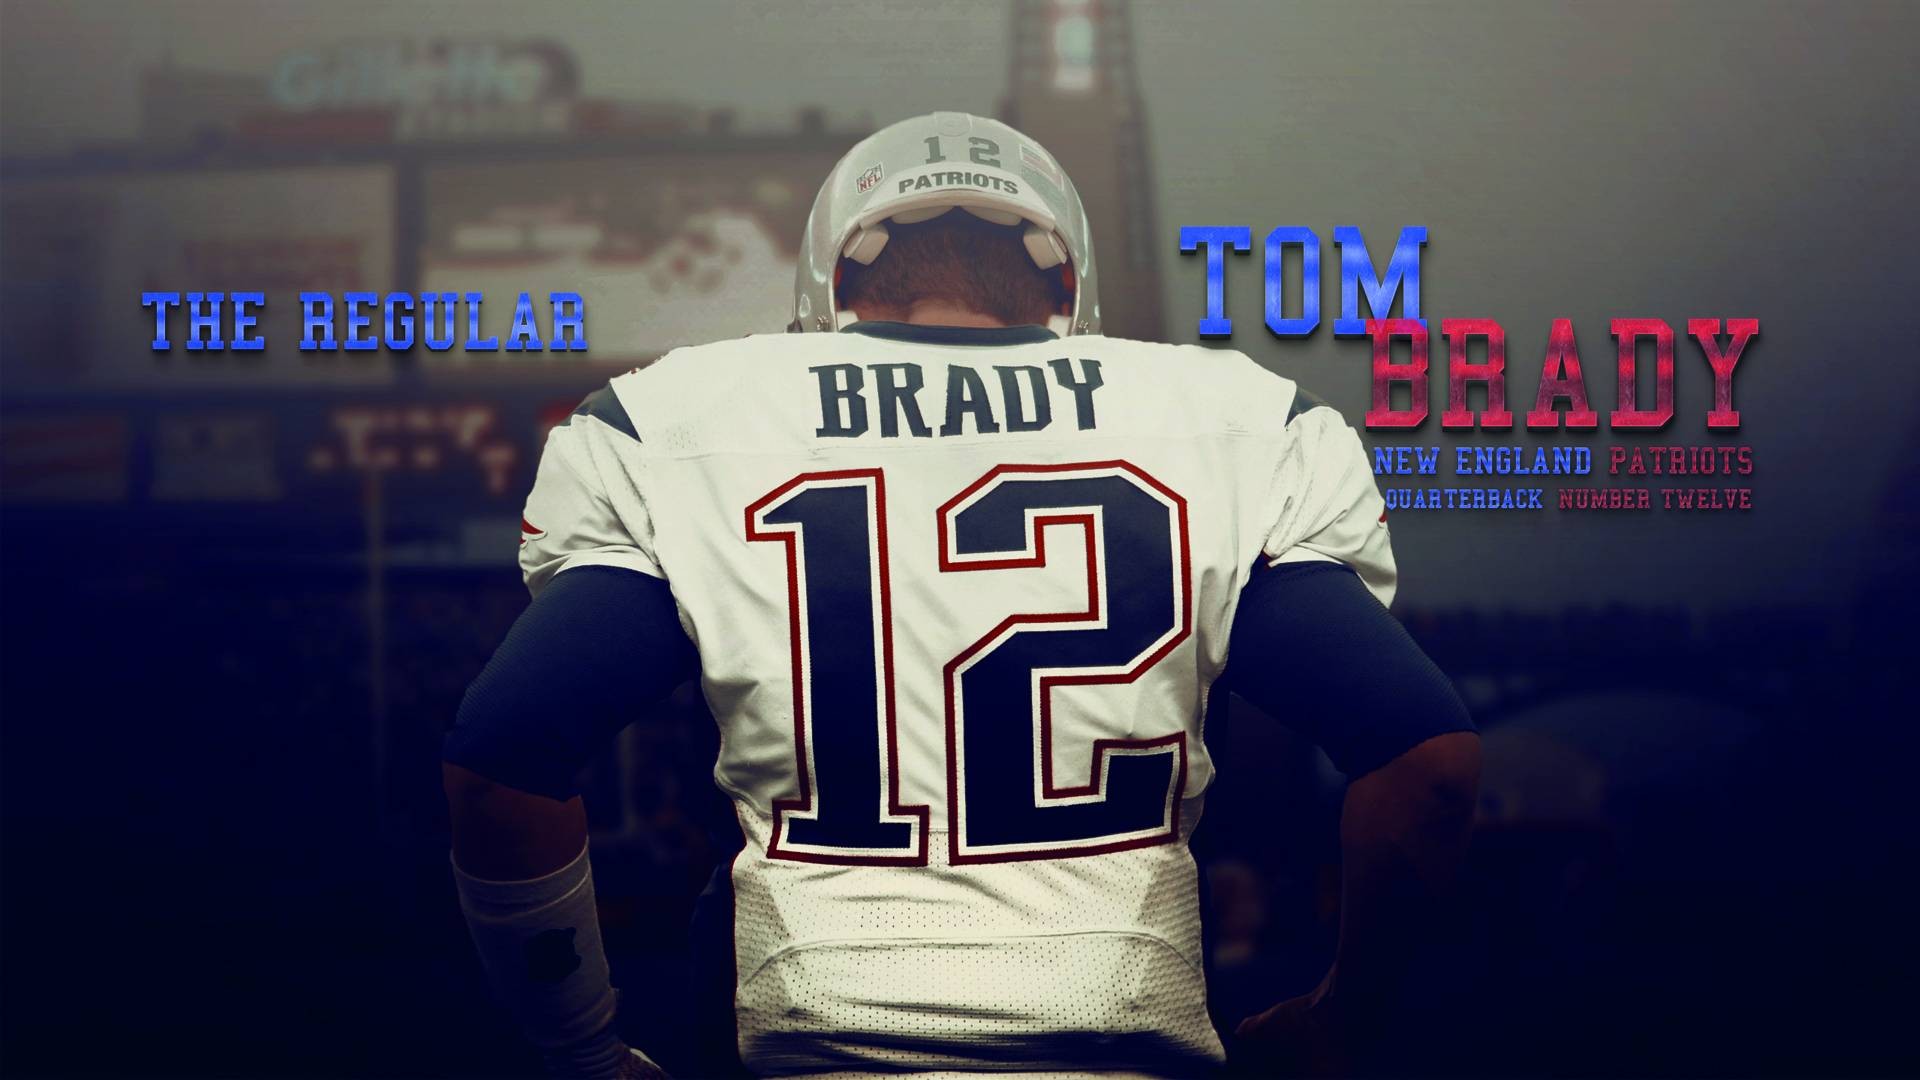 Wallpaper Tom Brady HD With Resolution 1920X1080 pixel. You can make this wallpaper for your Desktop Computer Backgrounds, Mac Wallpapers, Android Lock screen or iPhone Screensavers